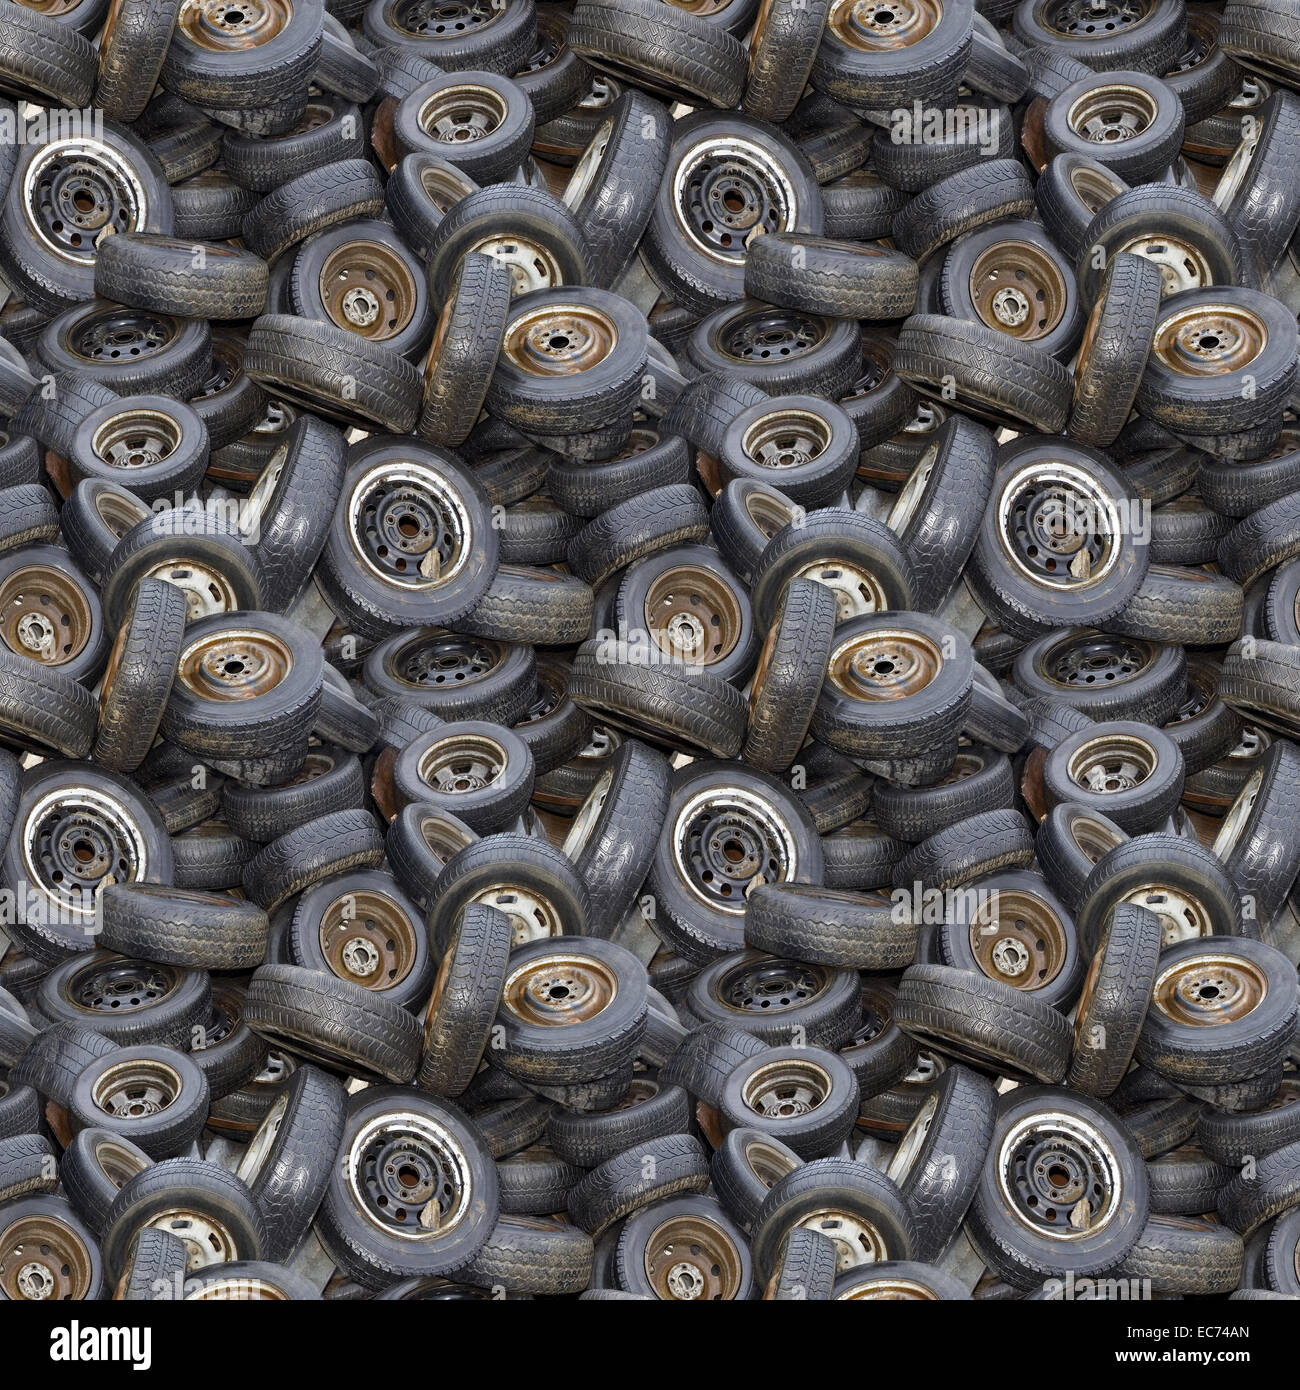 Old Tyres Seamless Background Pattern Stock Photo